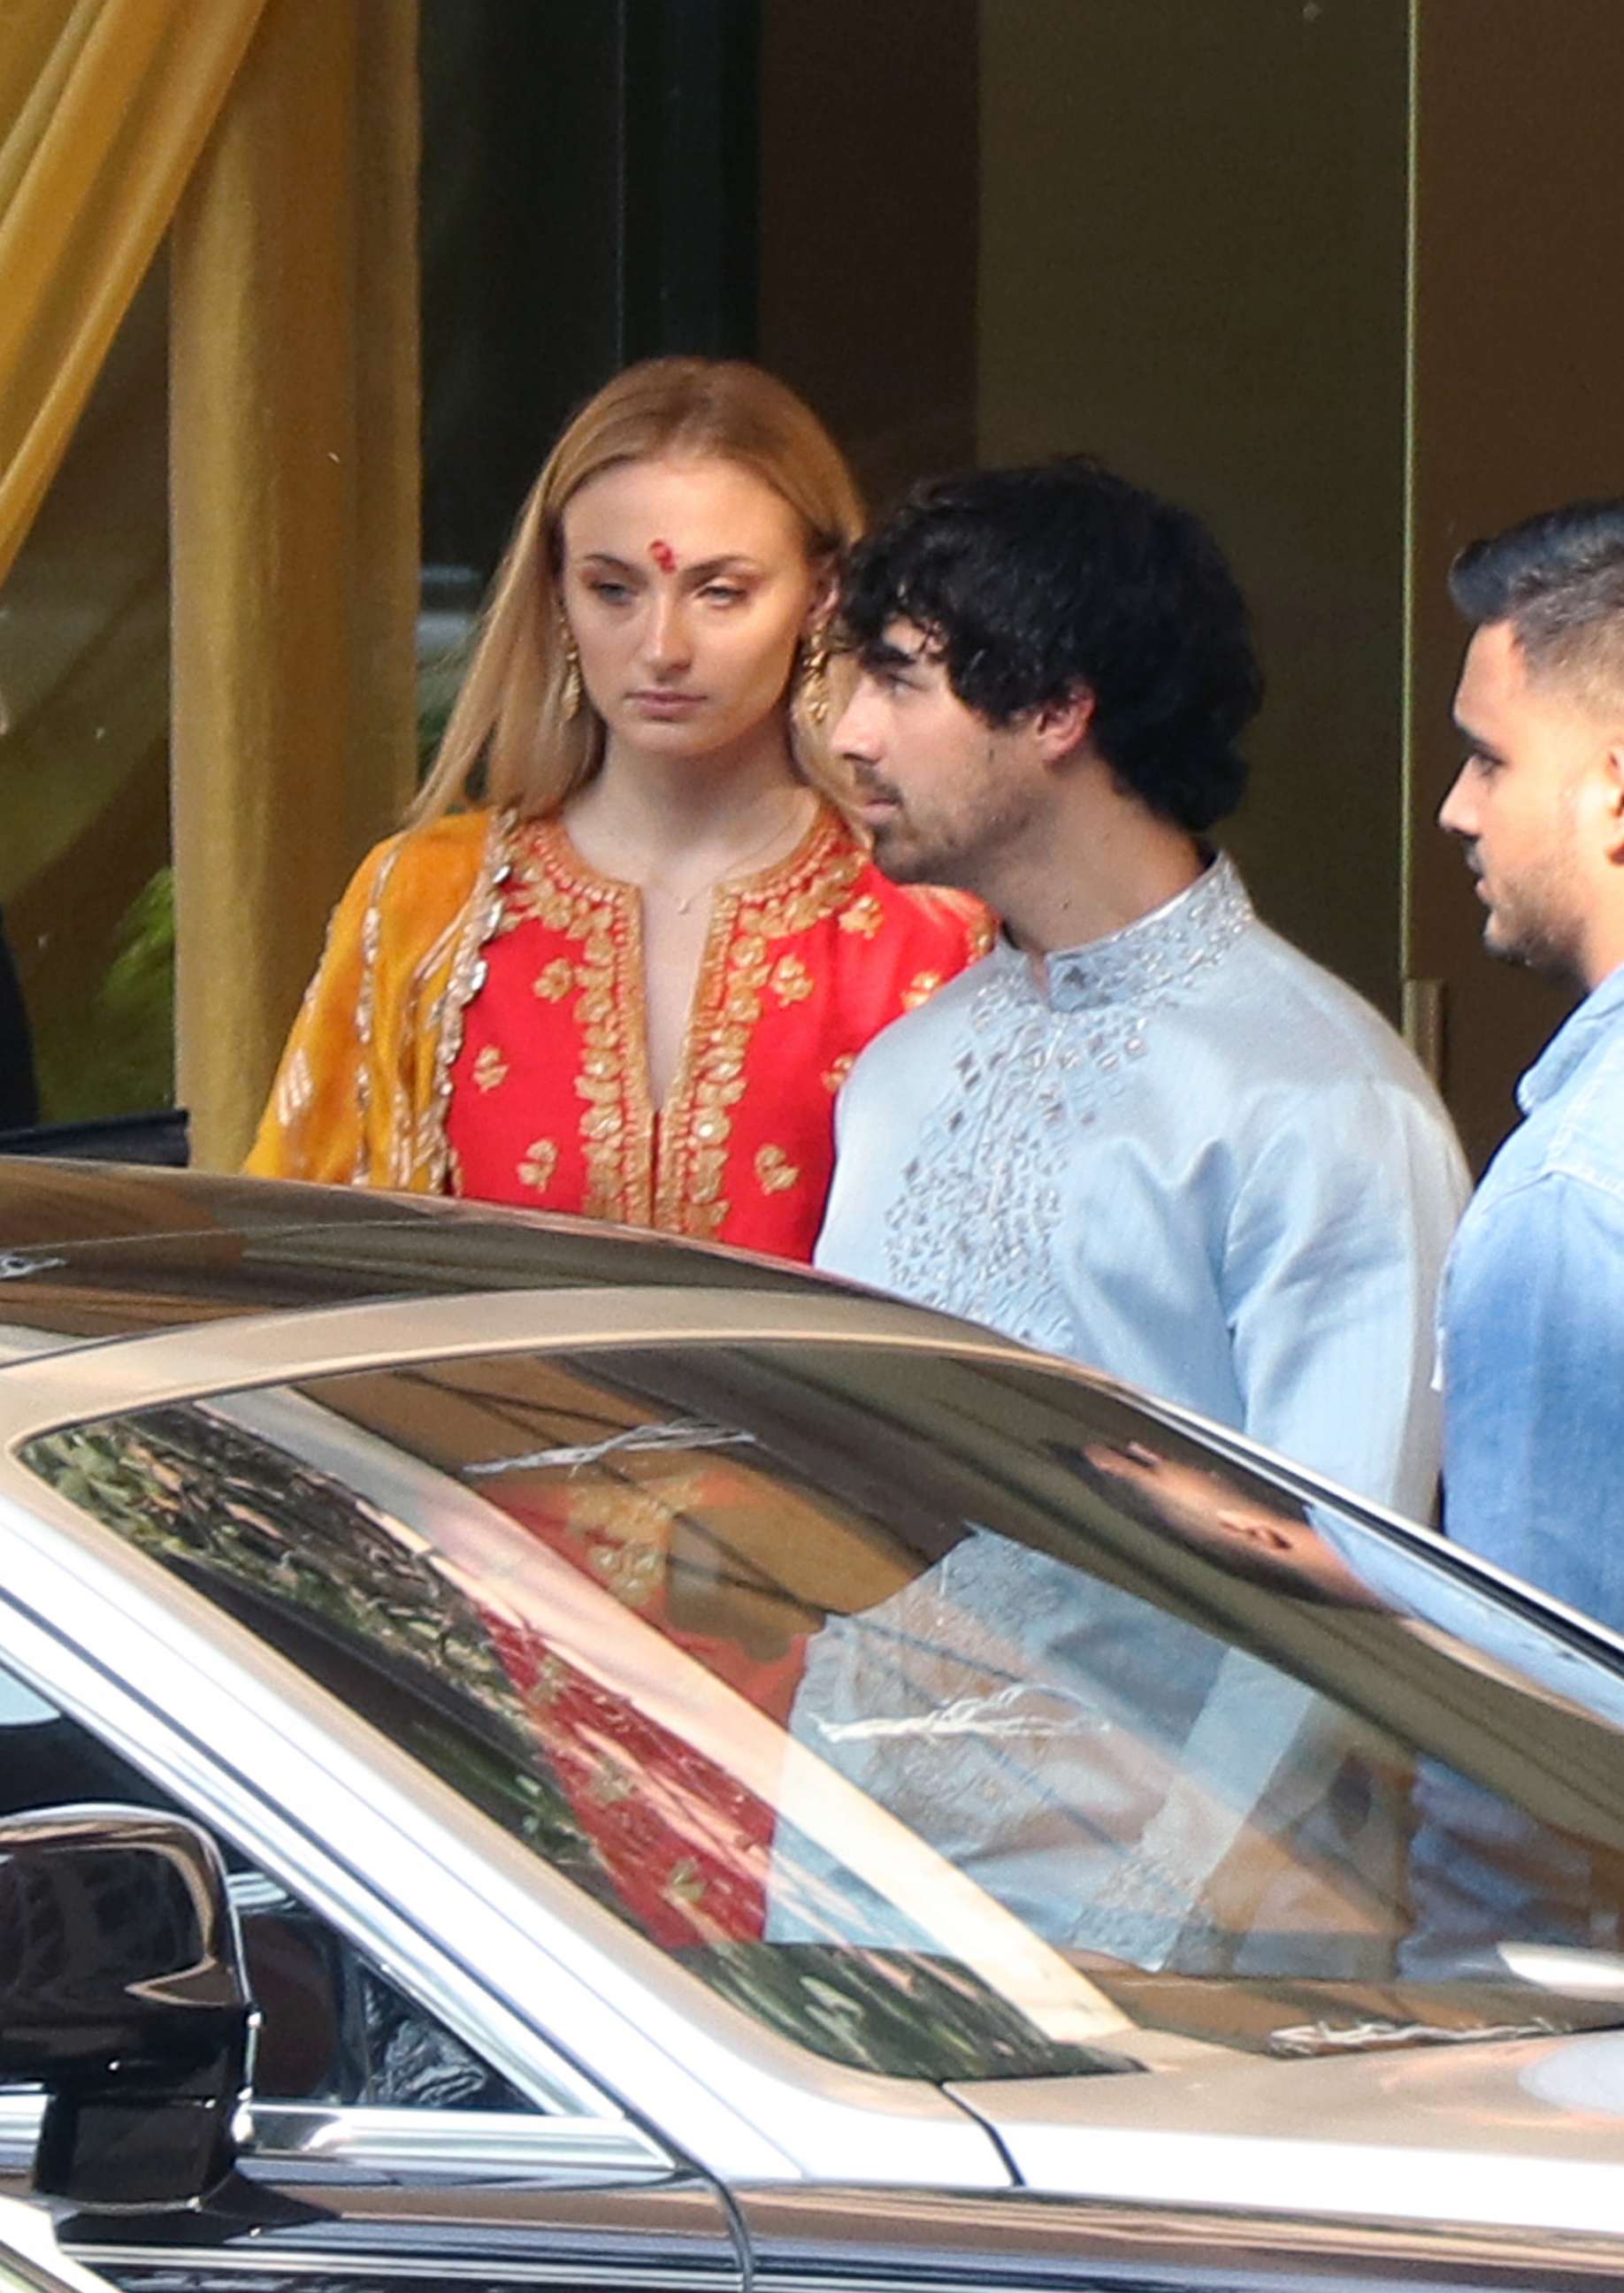 PHOTO: Nick Jonas and Sophie Turner leave a hotel in India dressed in traditional clothing for Nick's brother Joe's wedding to Priyanka Chopra, Nov. 29, 2018.